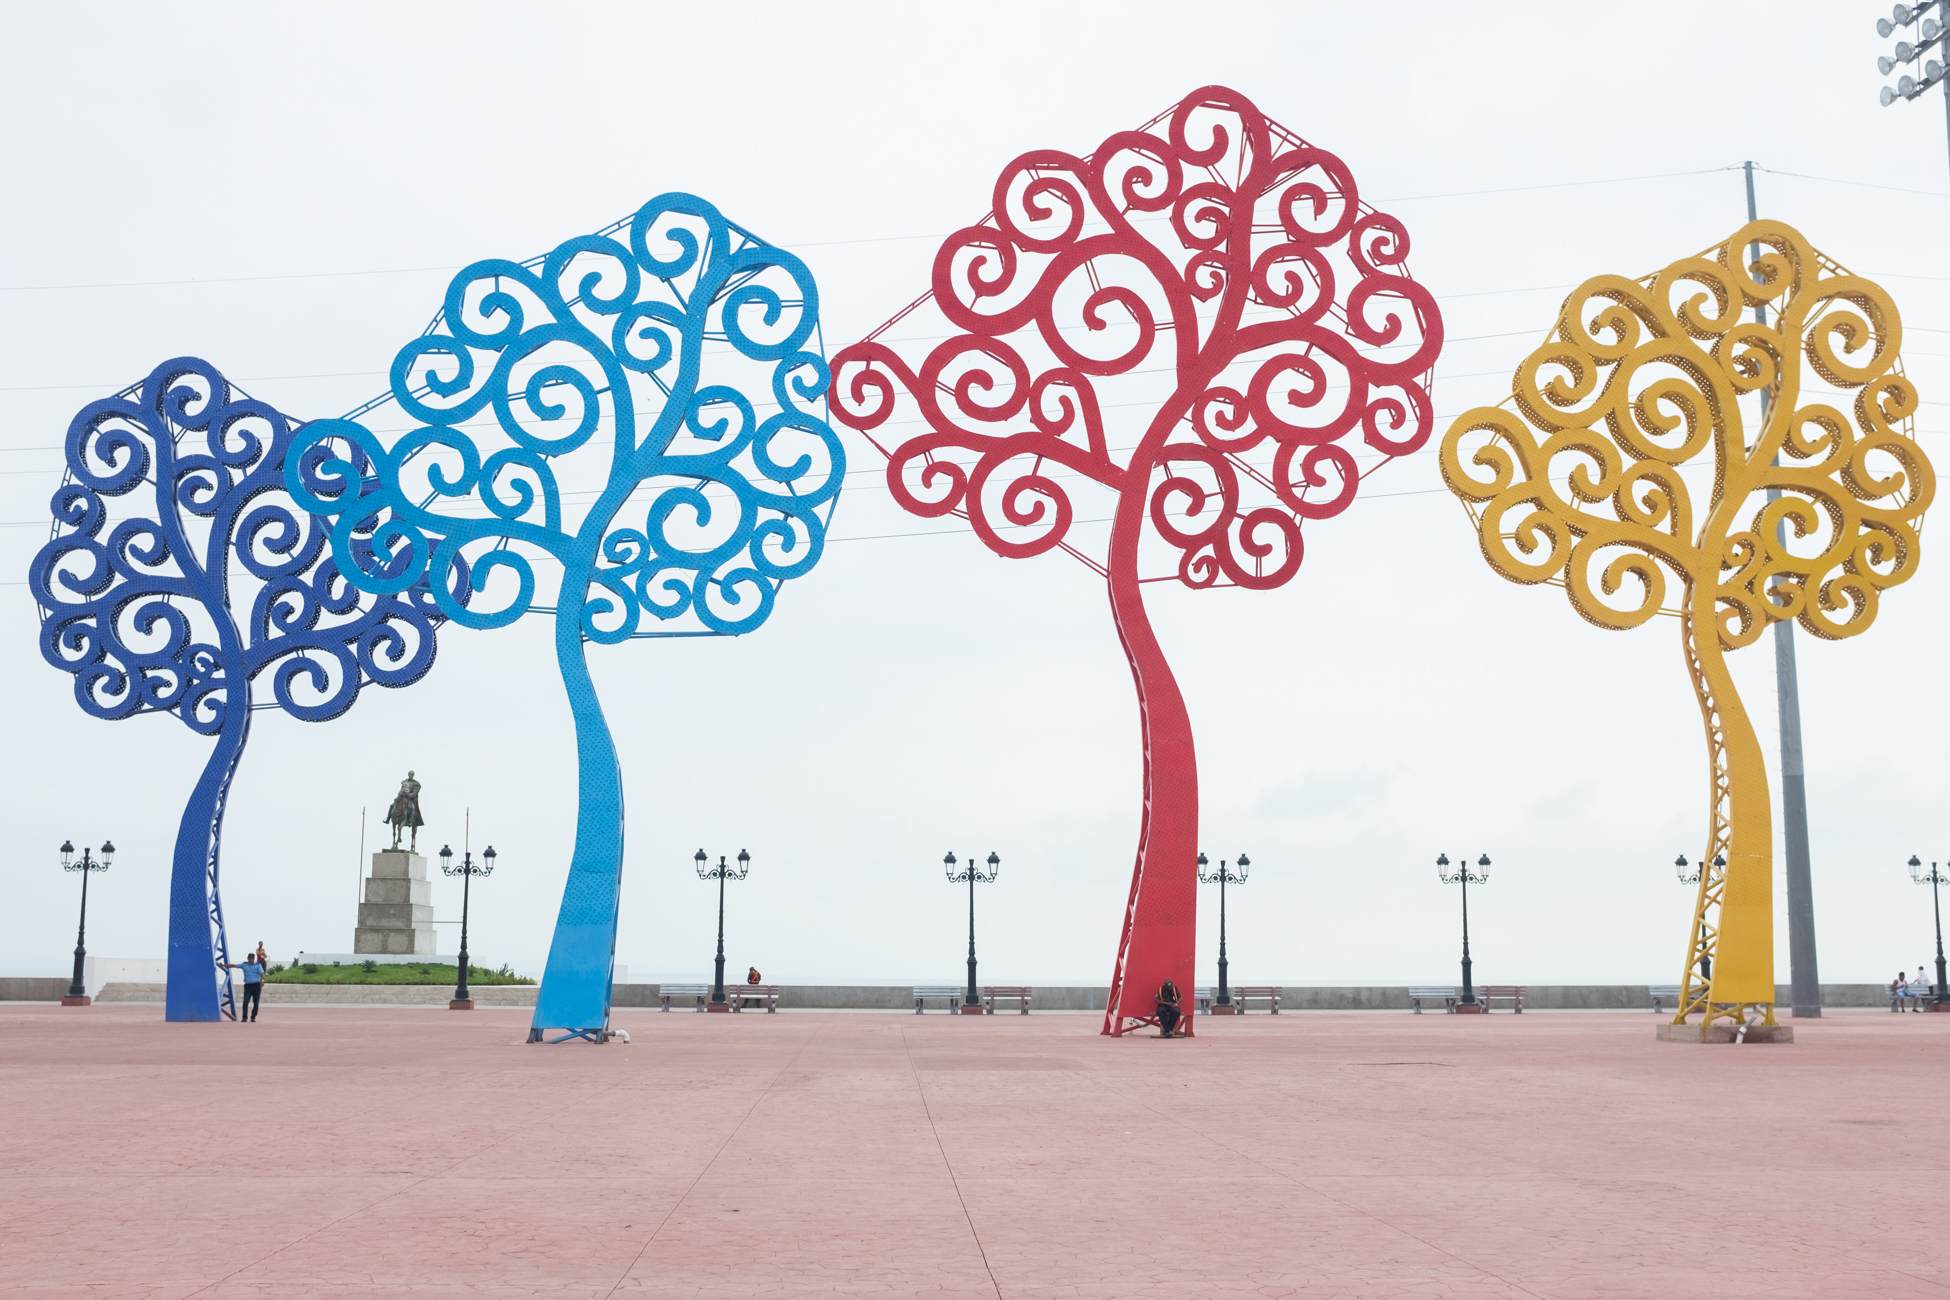  "Arboles de Vida" or "trees of life" stand tall and colorful, built by the government in Managua, Nicaragua  